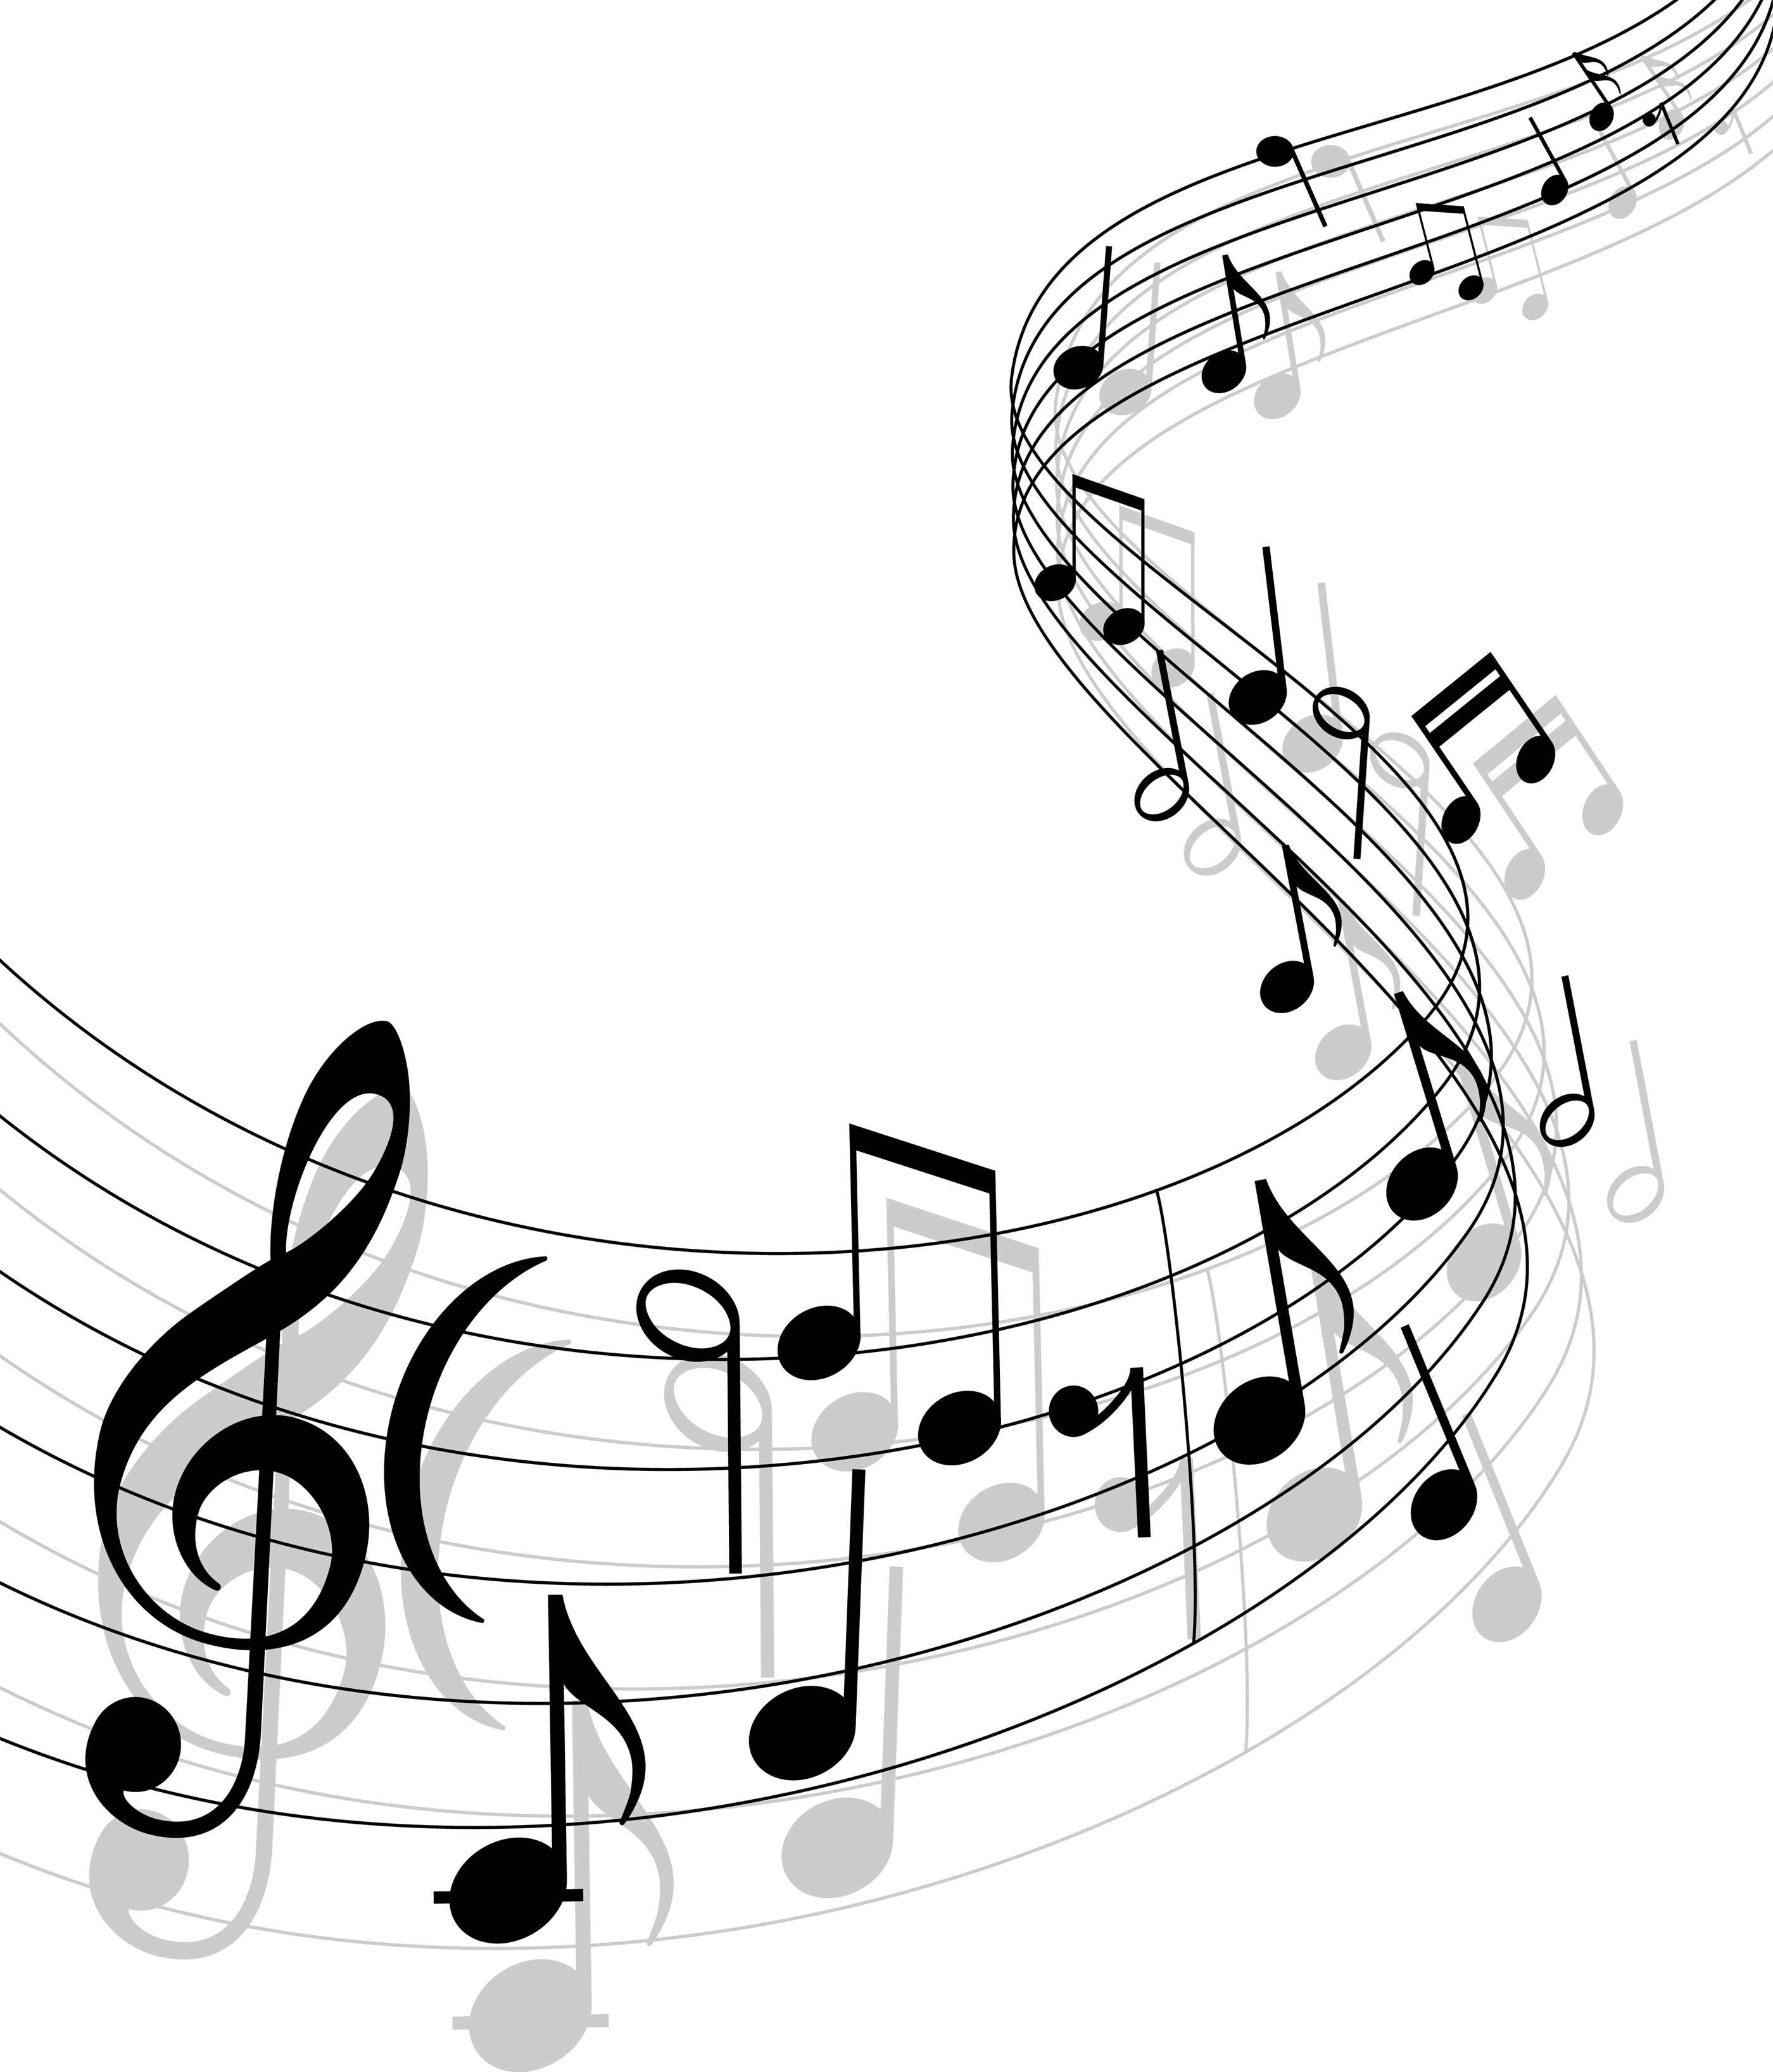 Music notes  black and white music notes clipart black and white free 5 2